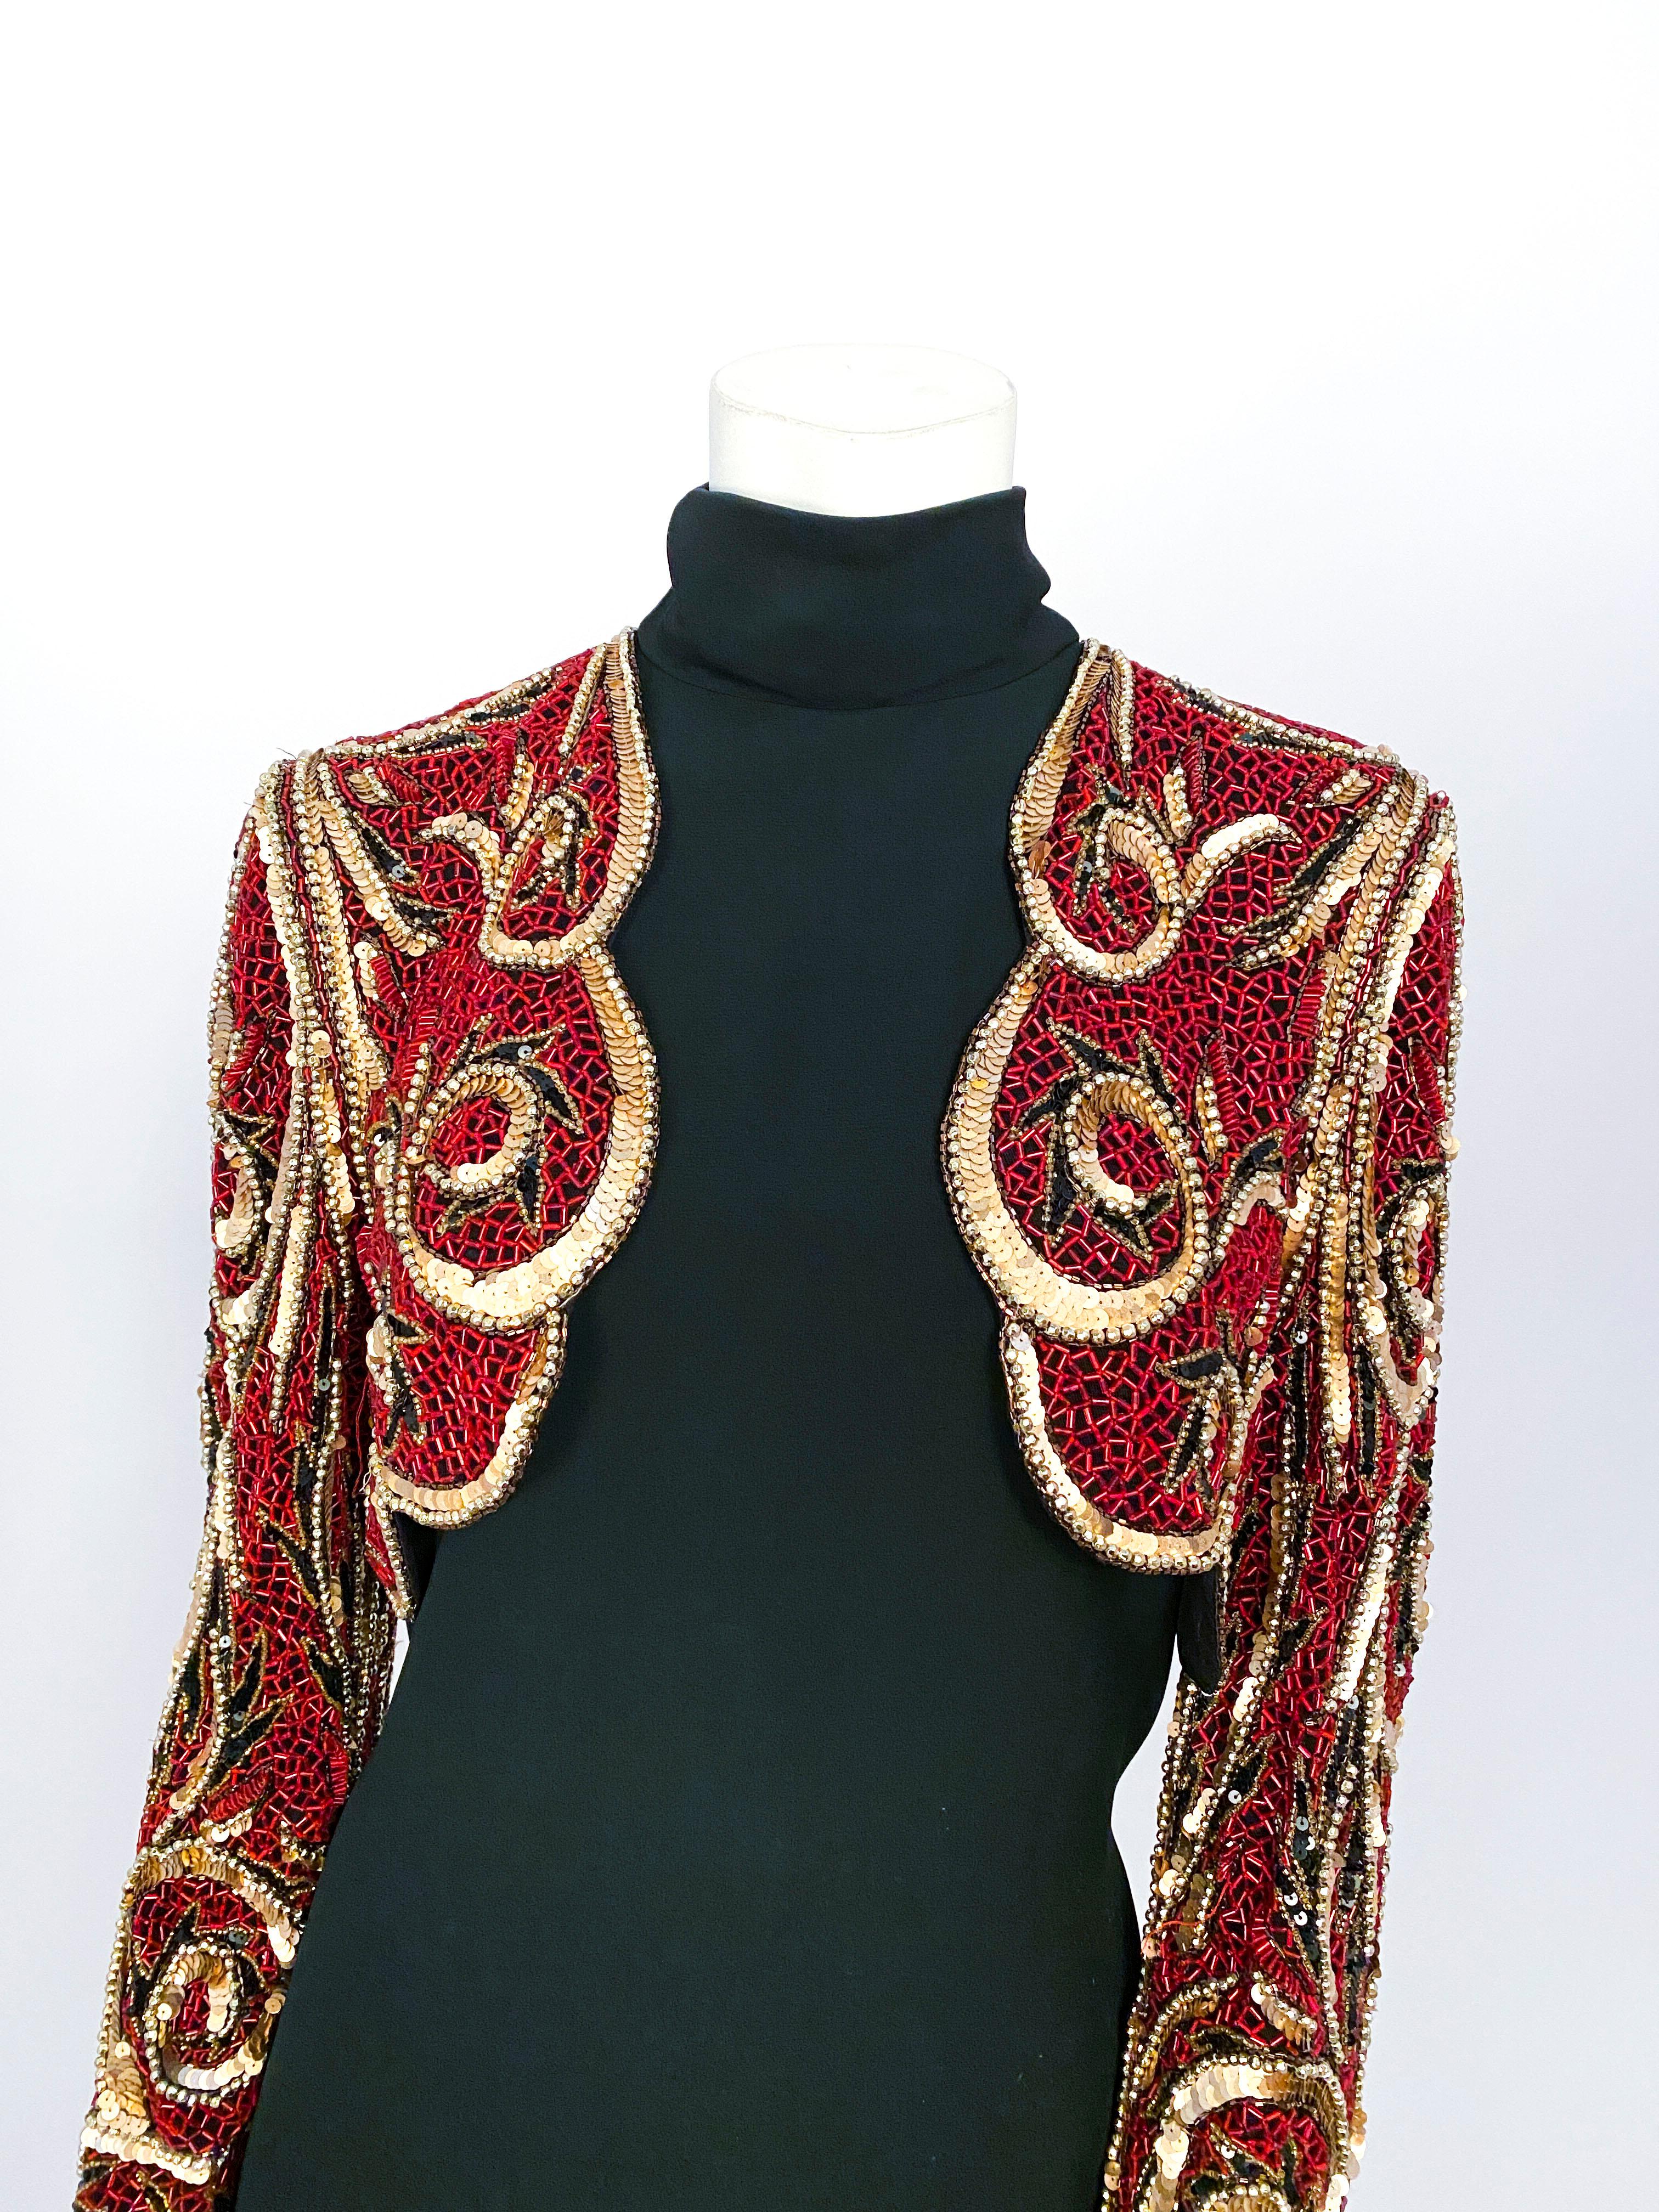 1980s Bob Mackie black rayon crepe high-neck dress with a faux beaded bolero that is attached. The faux bolero is entirely adorned with red glass beads, gold and black sequin. Completely lined and finished with a back zipper closure.